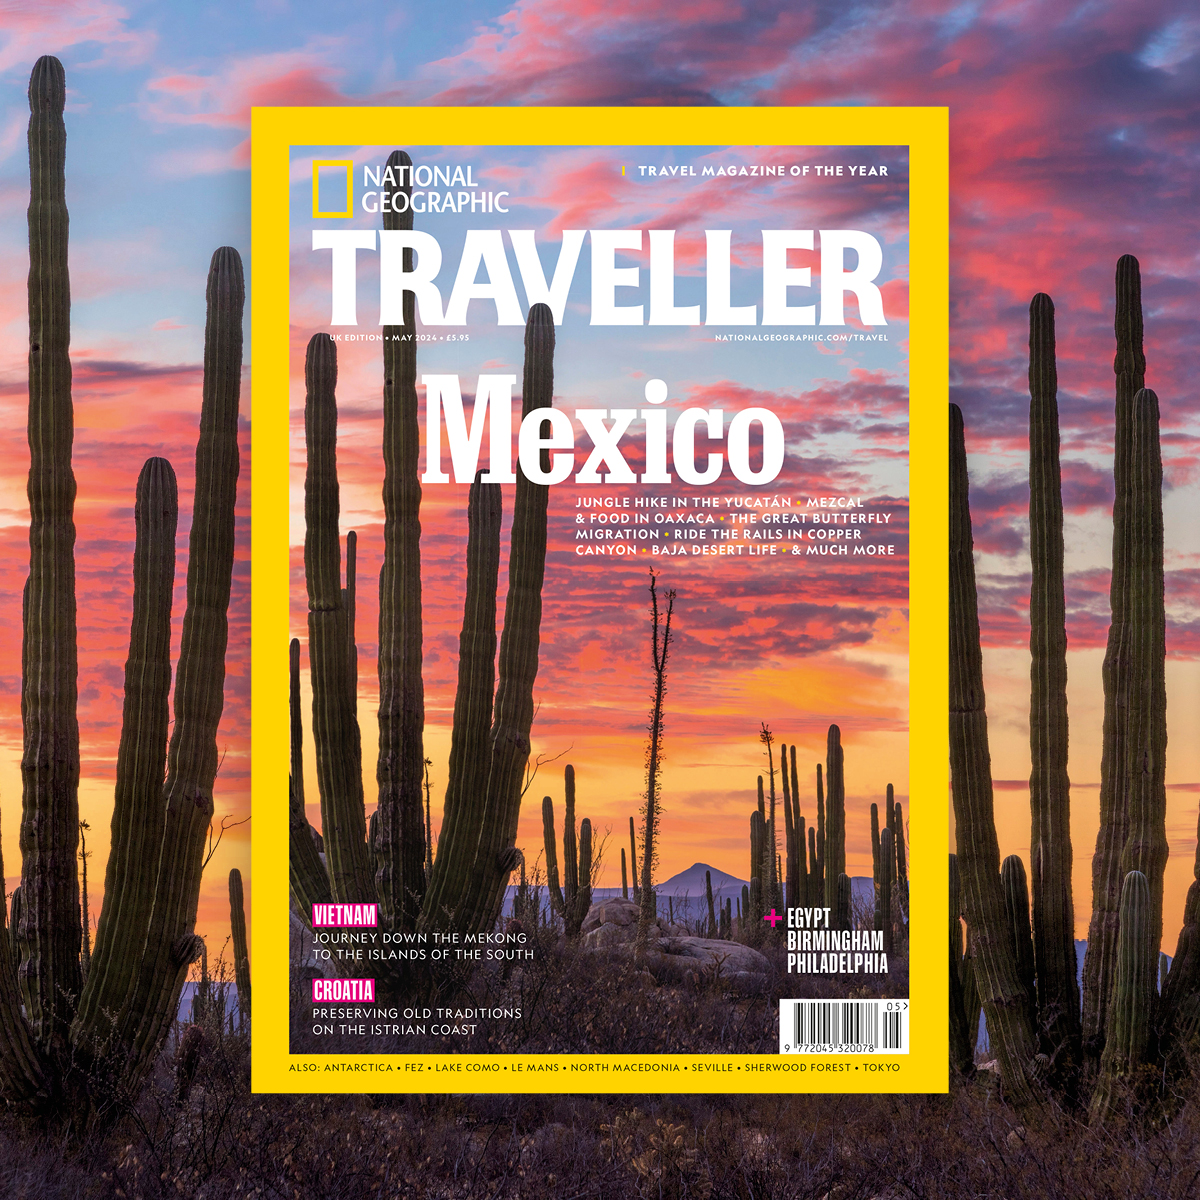 Jungle trails taking in the Yucatan’s complex history, all-female kitchens preserving age-old recipes, forested hills enveloped by monarch butterflies — you’ll find fresh experiences in Mexico in our May issue. Read now: pocketmags.com/national-geogr…